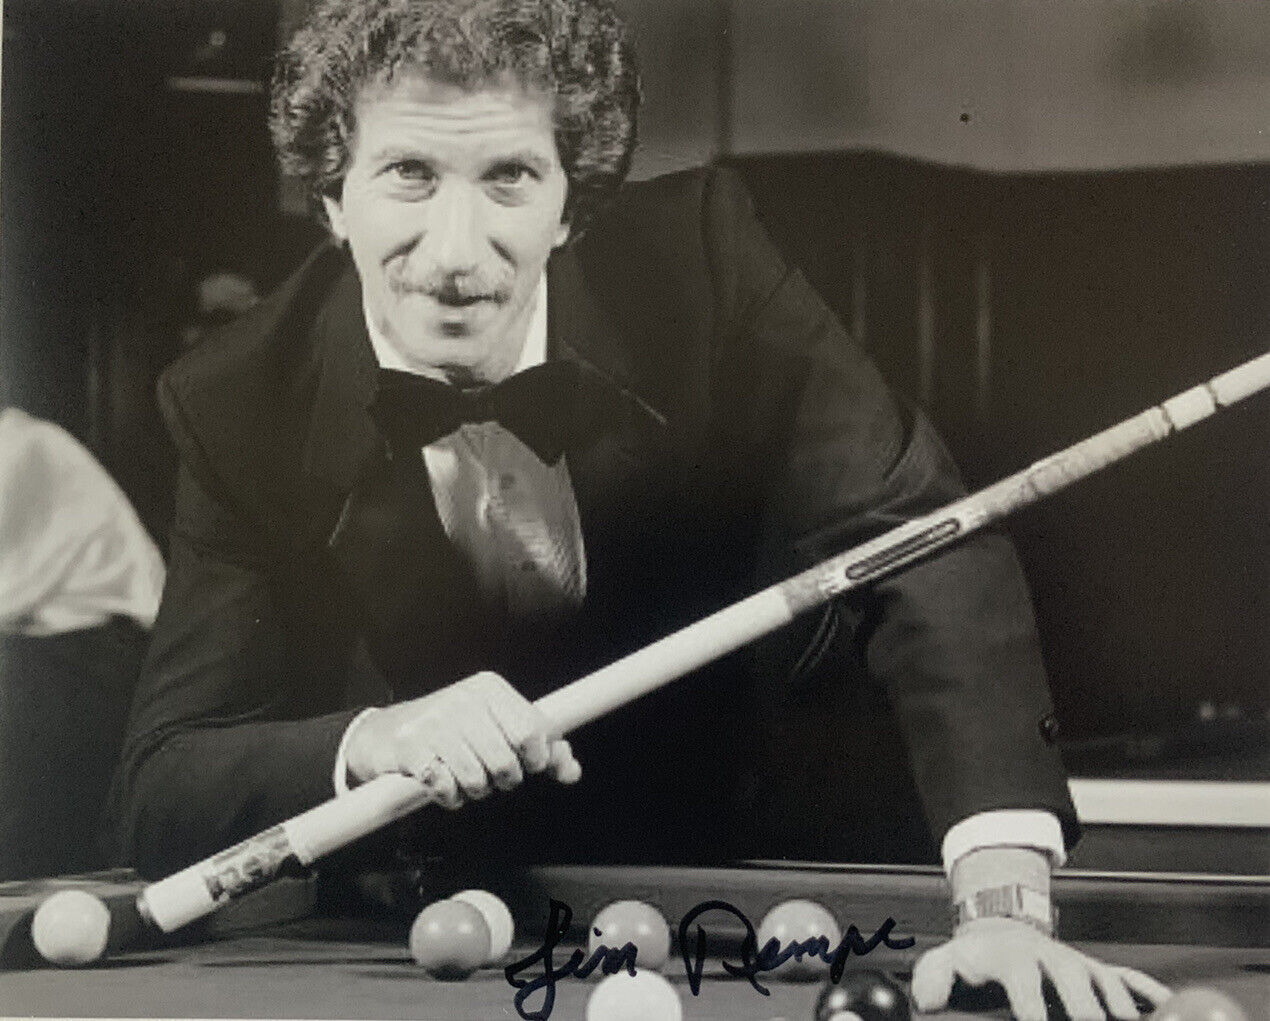 JAMES REMPE HAND SIGNED 8x10 Photo Poster painting BILLIARDS POOL AUTOGRAPHEDAUTHENTIC COA